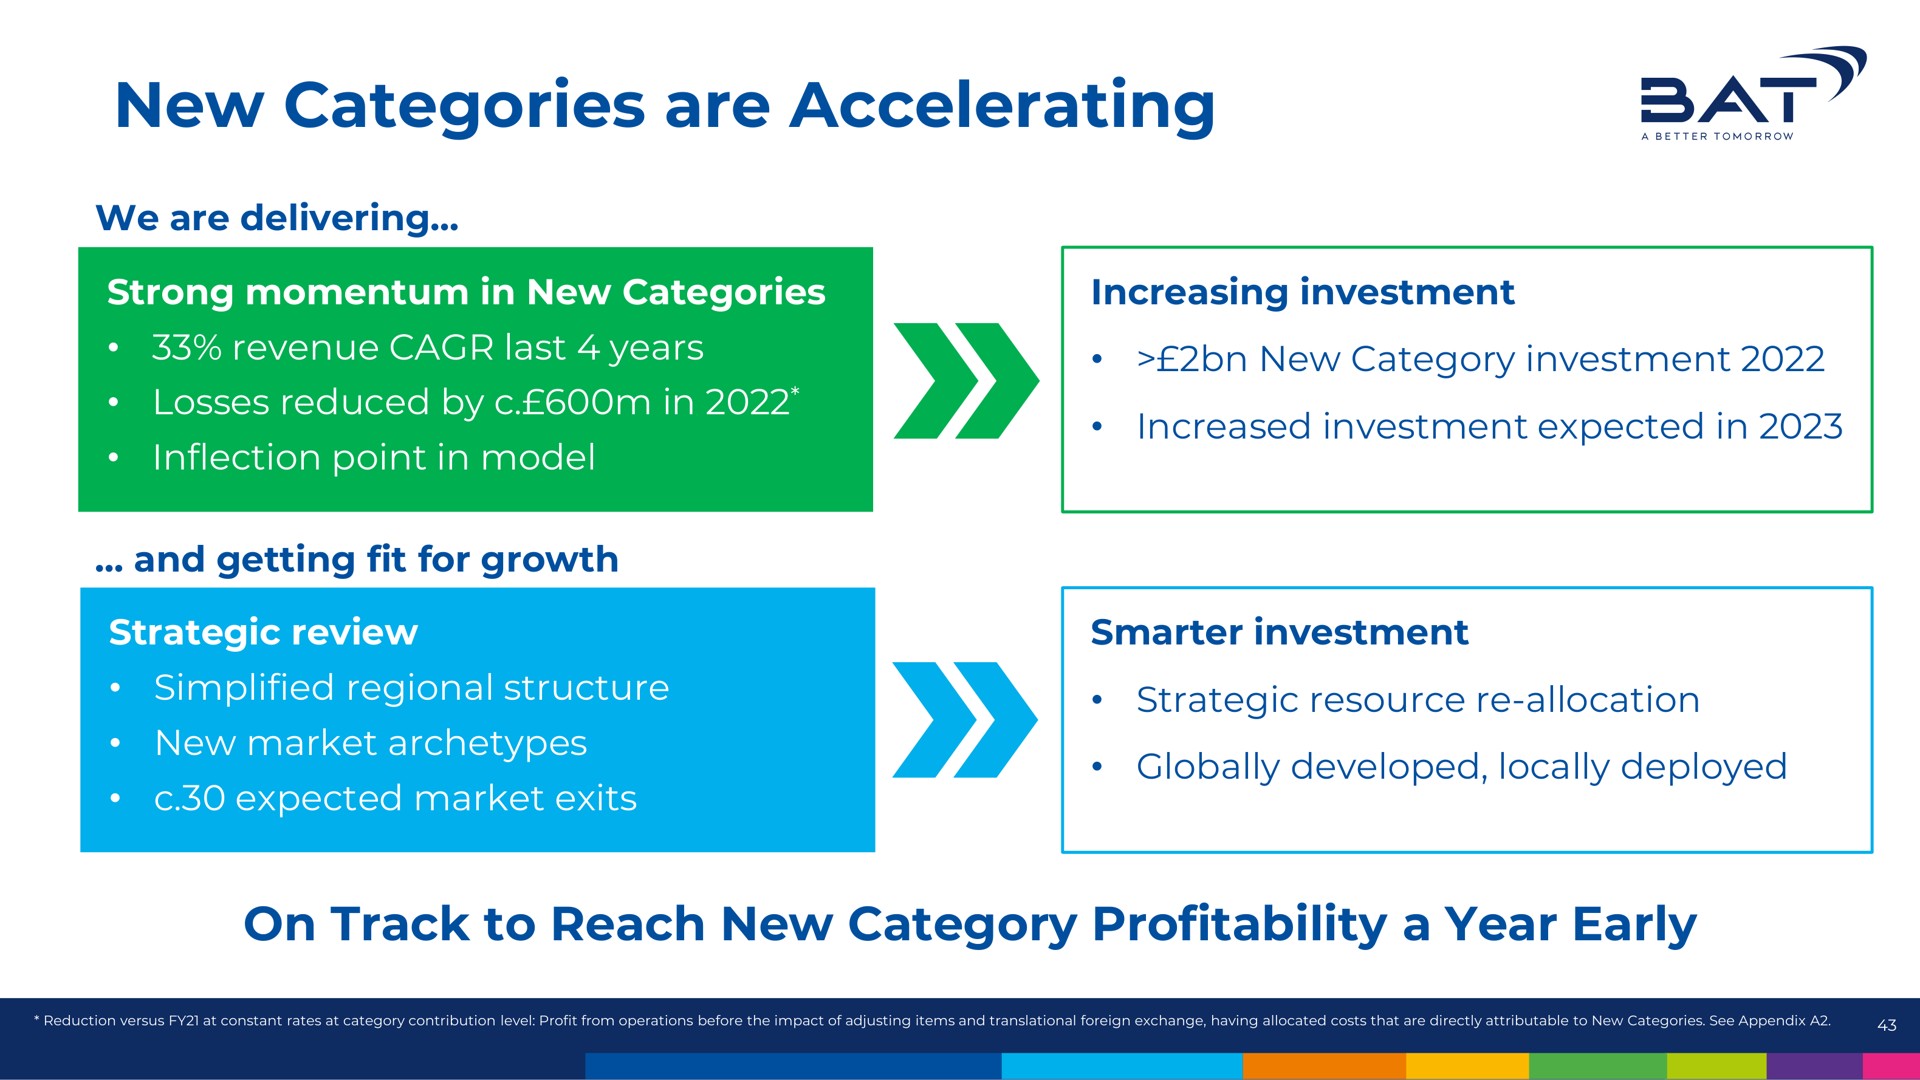 new categories are accelerating at | BAT